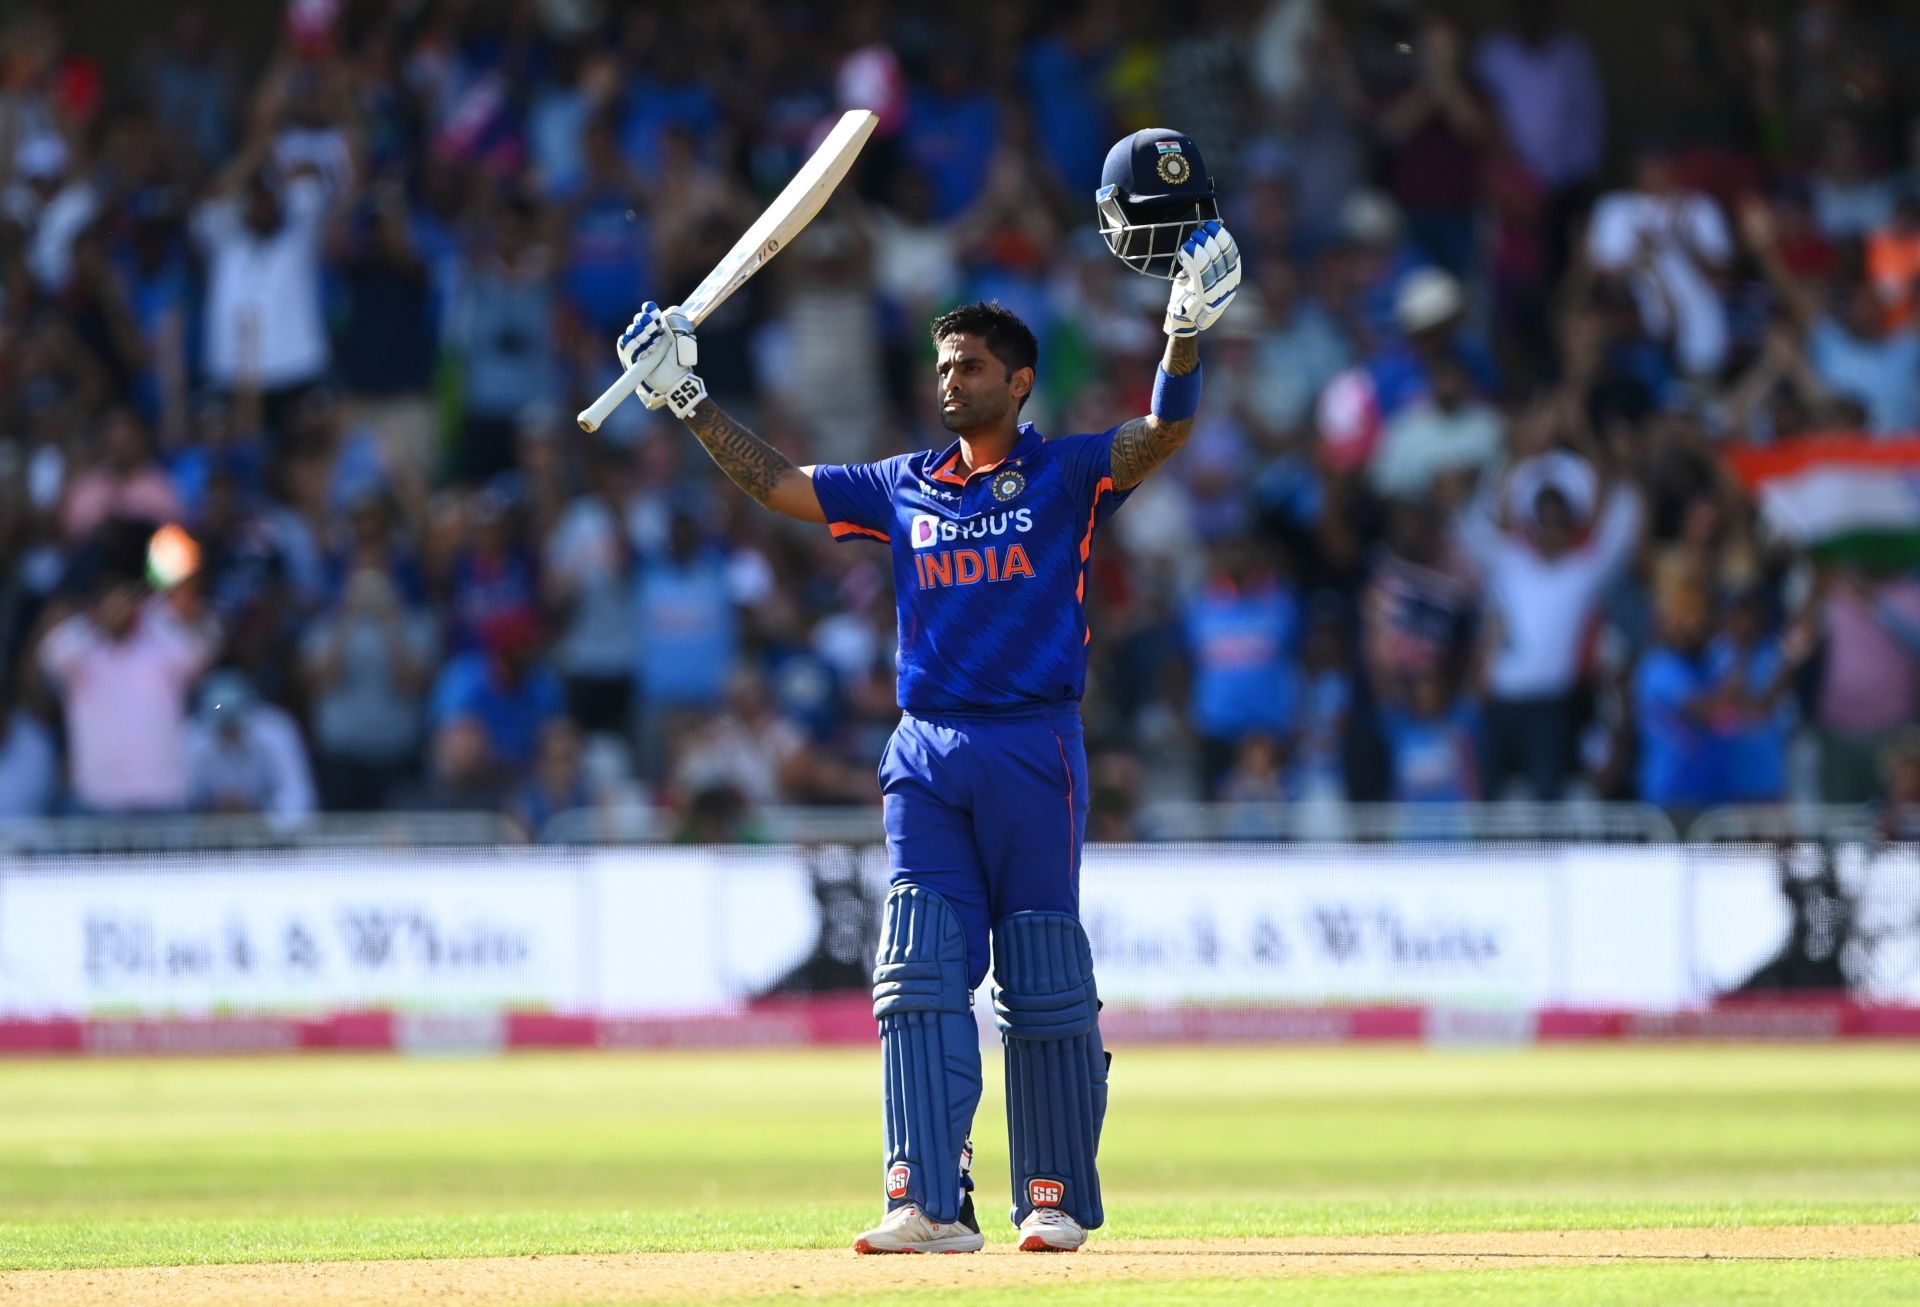 Suryakuamar Yadav became the fifth Indian batter to score a T20I century. (Image: Getty)